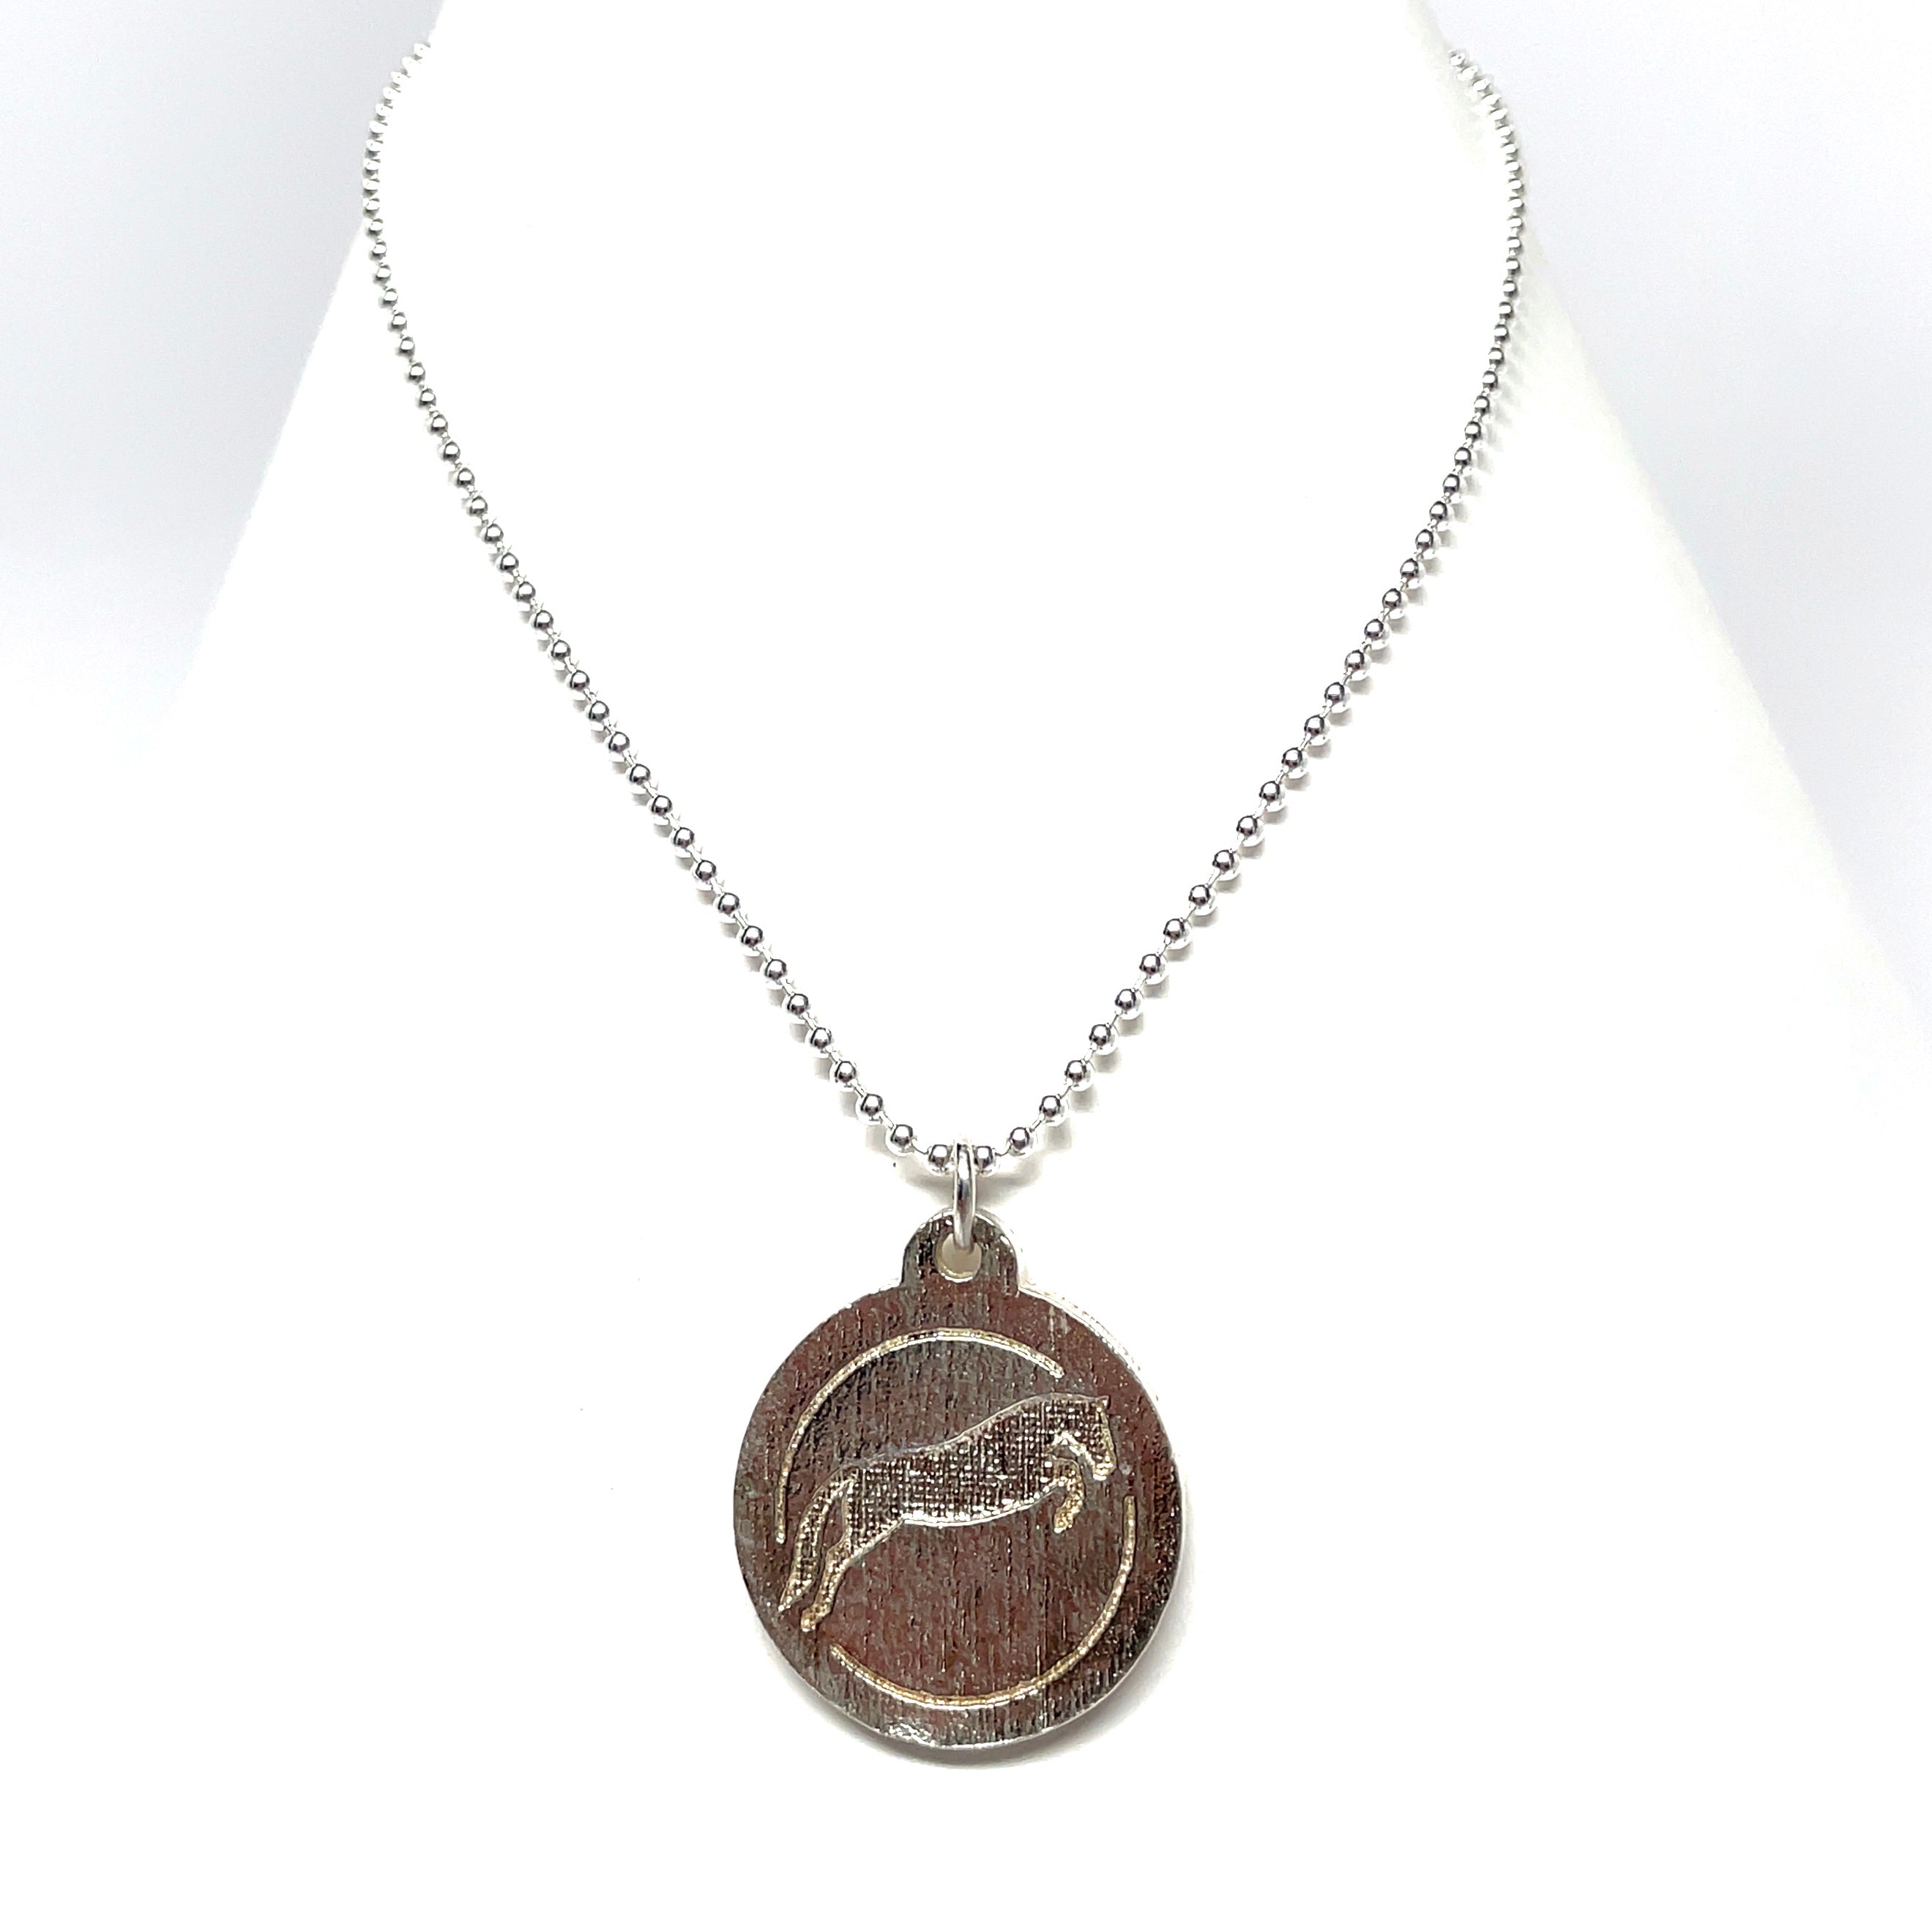 Jumping horse pendant necklace